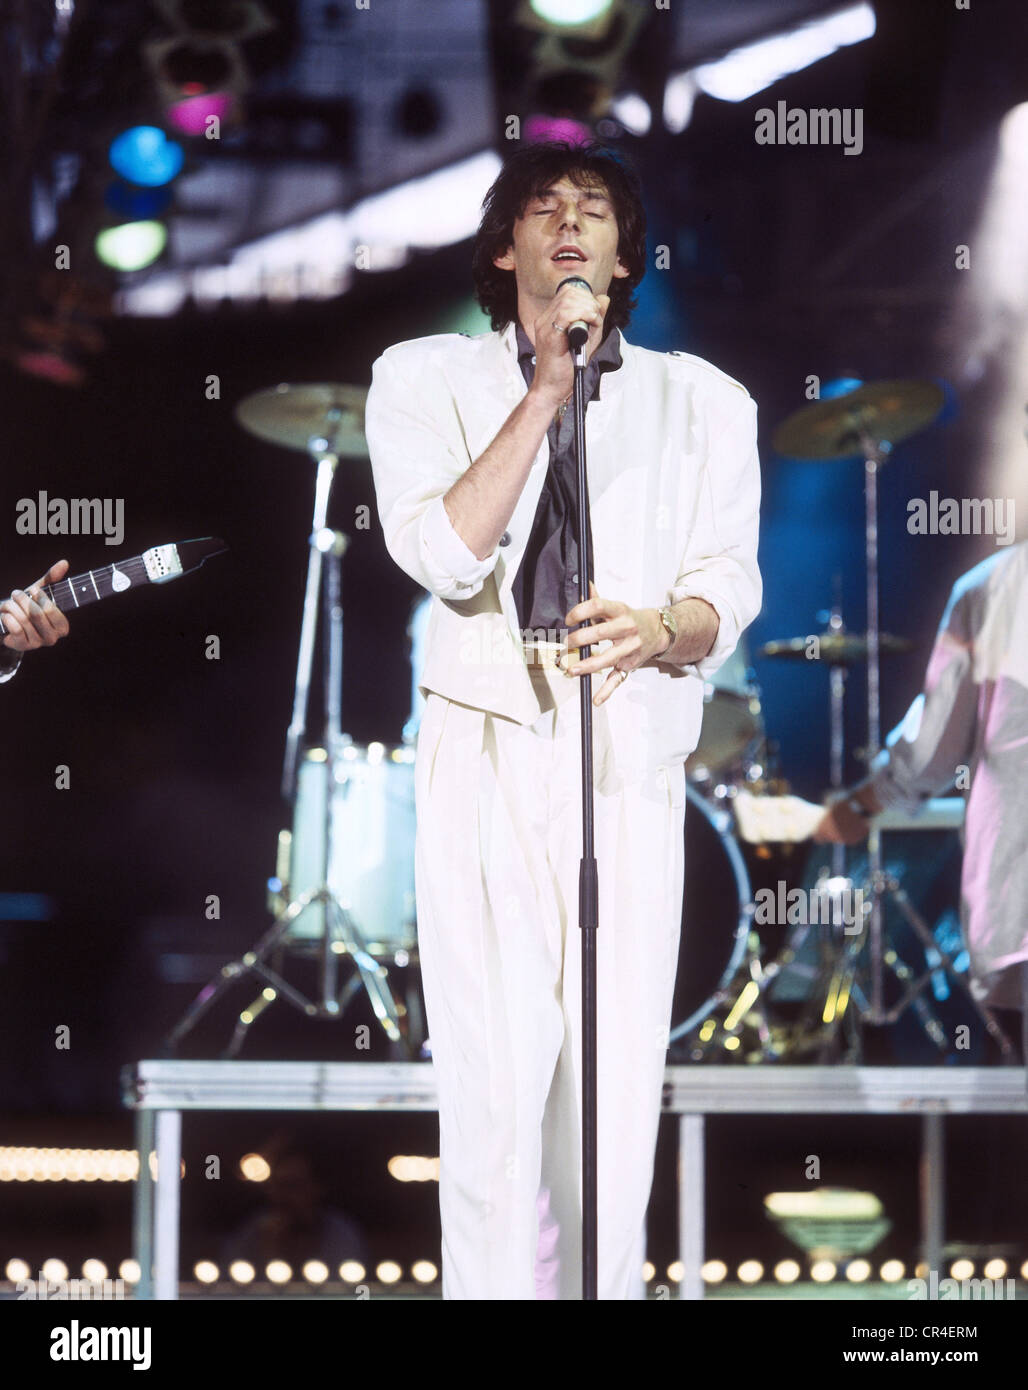 Münchener Freiheit, German band, founded 1981, vocalist, Stefan Zauner, at a performance, late 1980s, Stock Photo